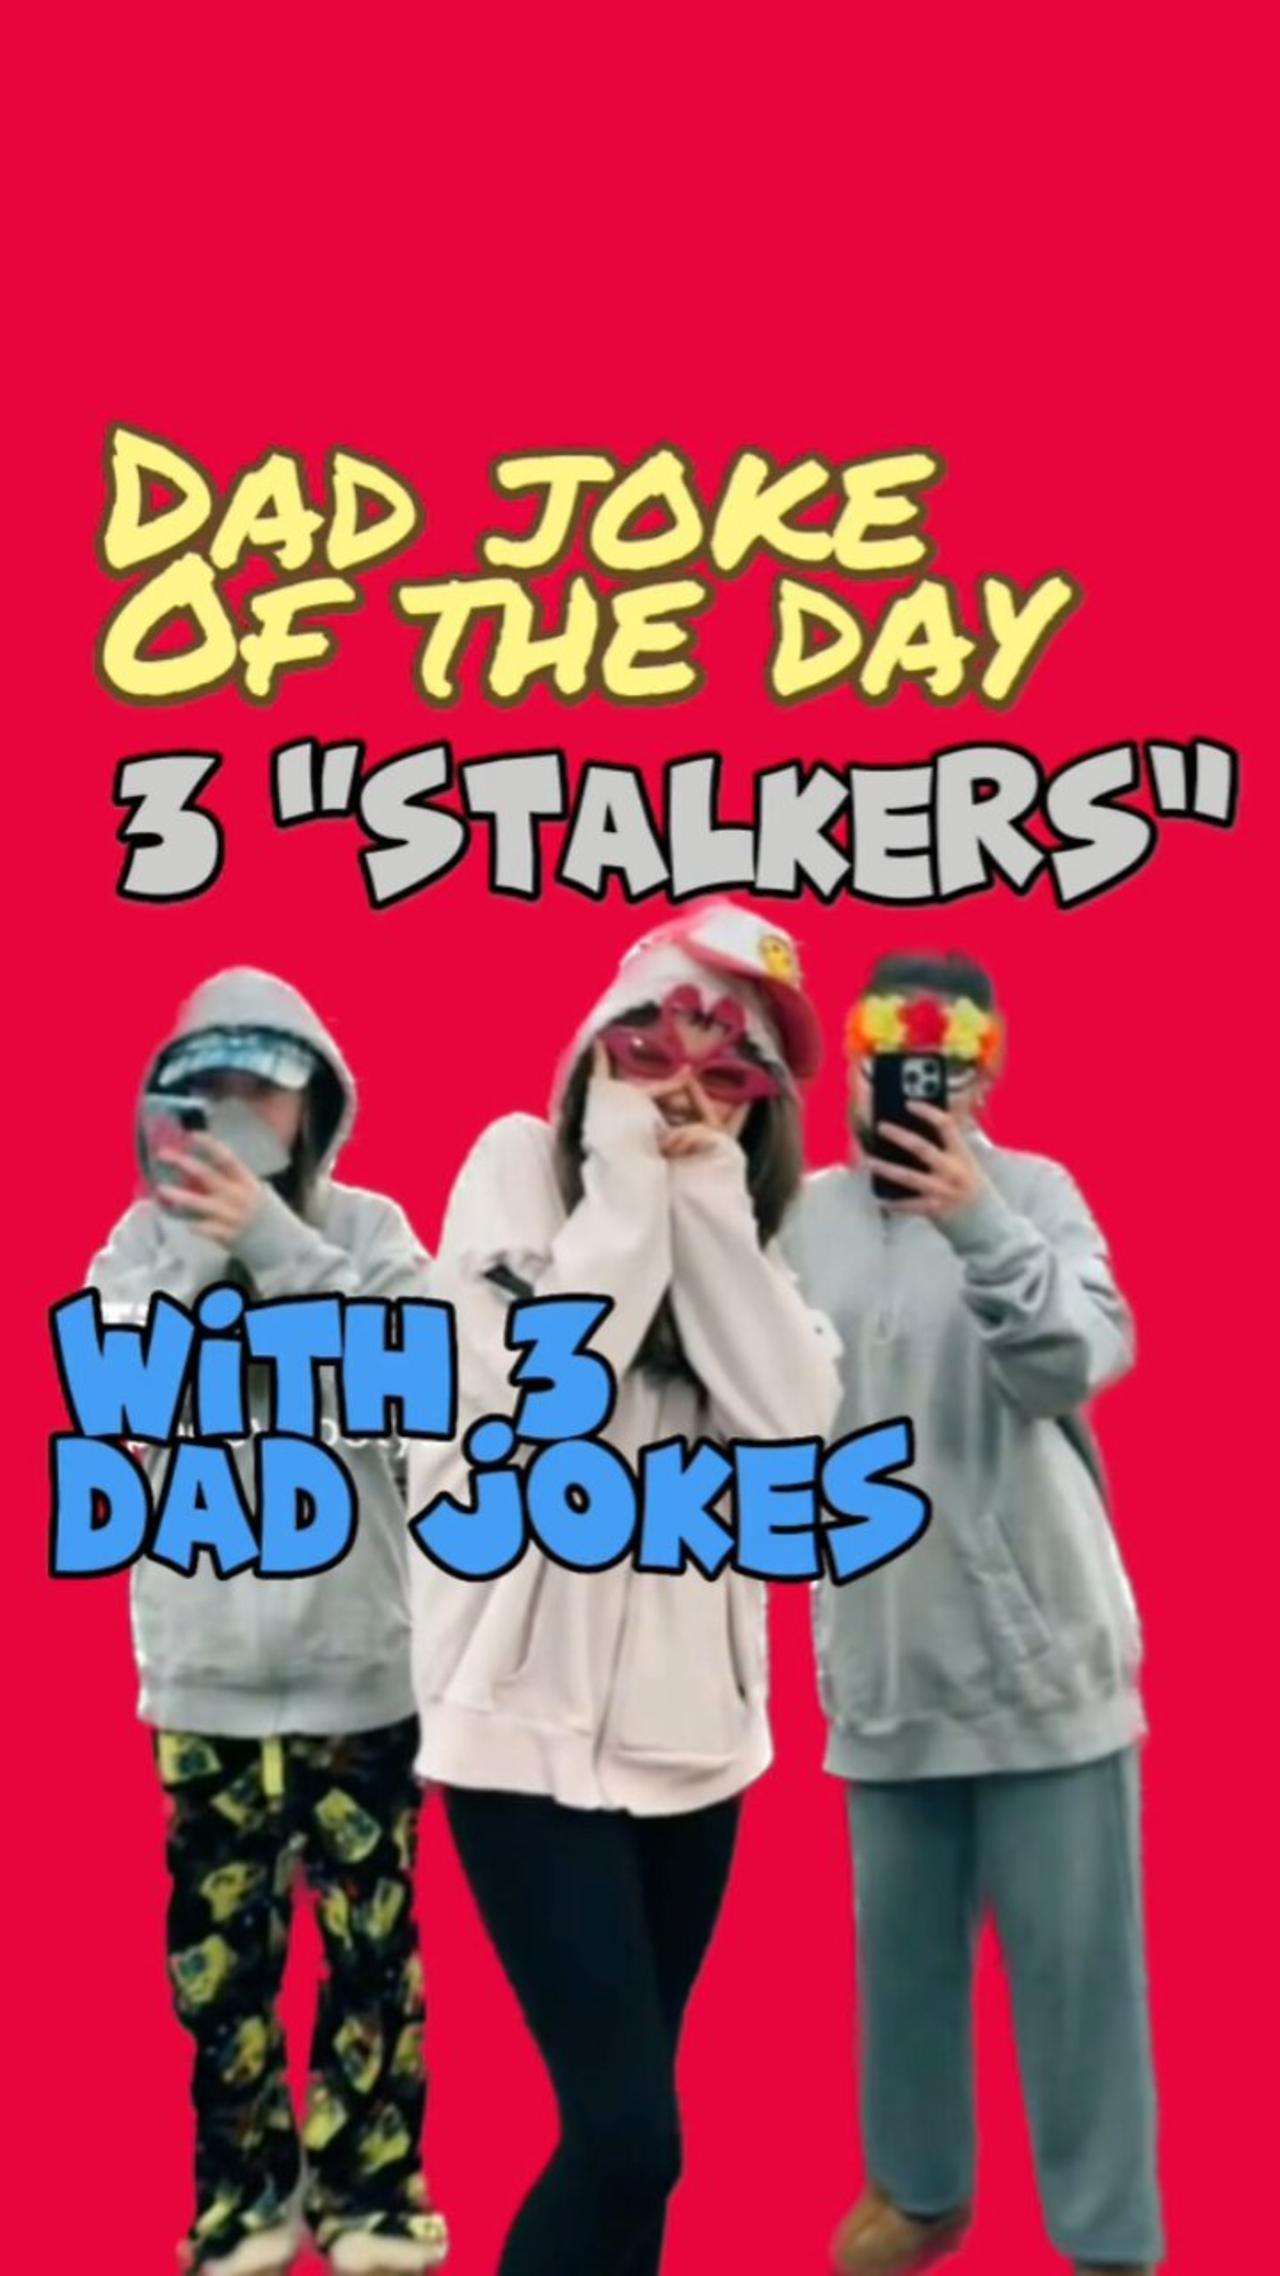 They hit me with 3! What would you do? - Dad Joke of the Day